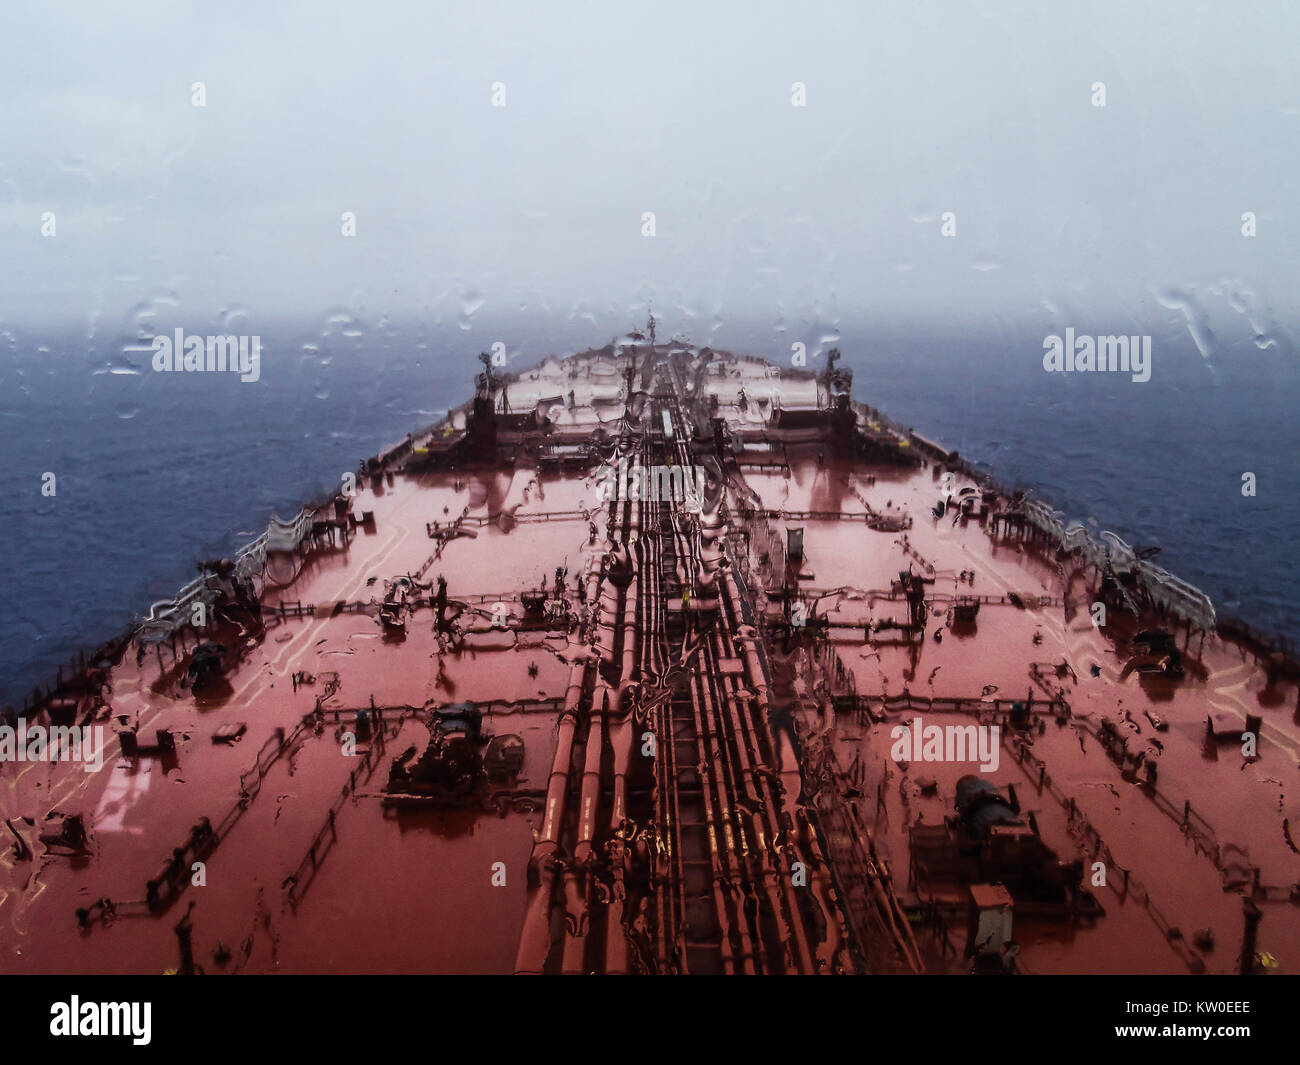 An oil tanker sailing in the Indian ocean in a rainy day Stock Photo